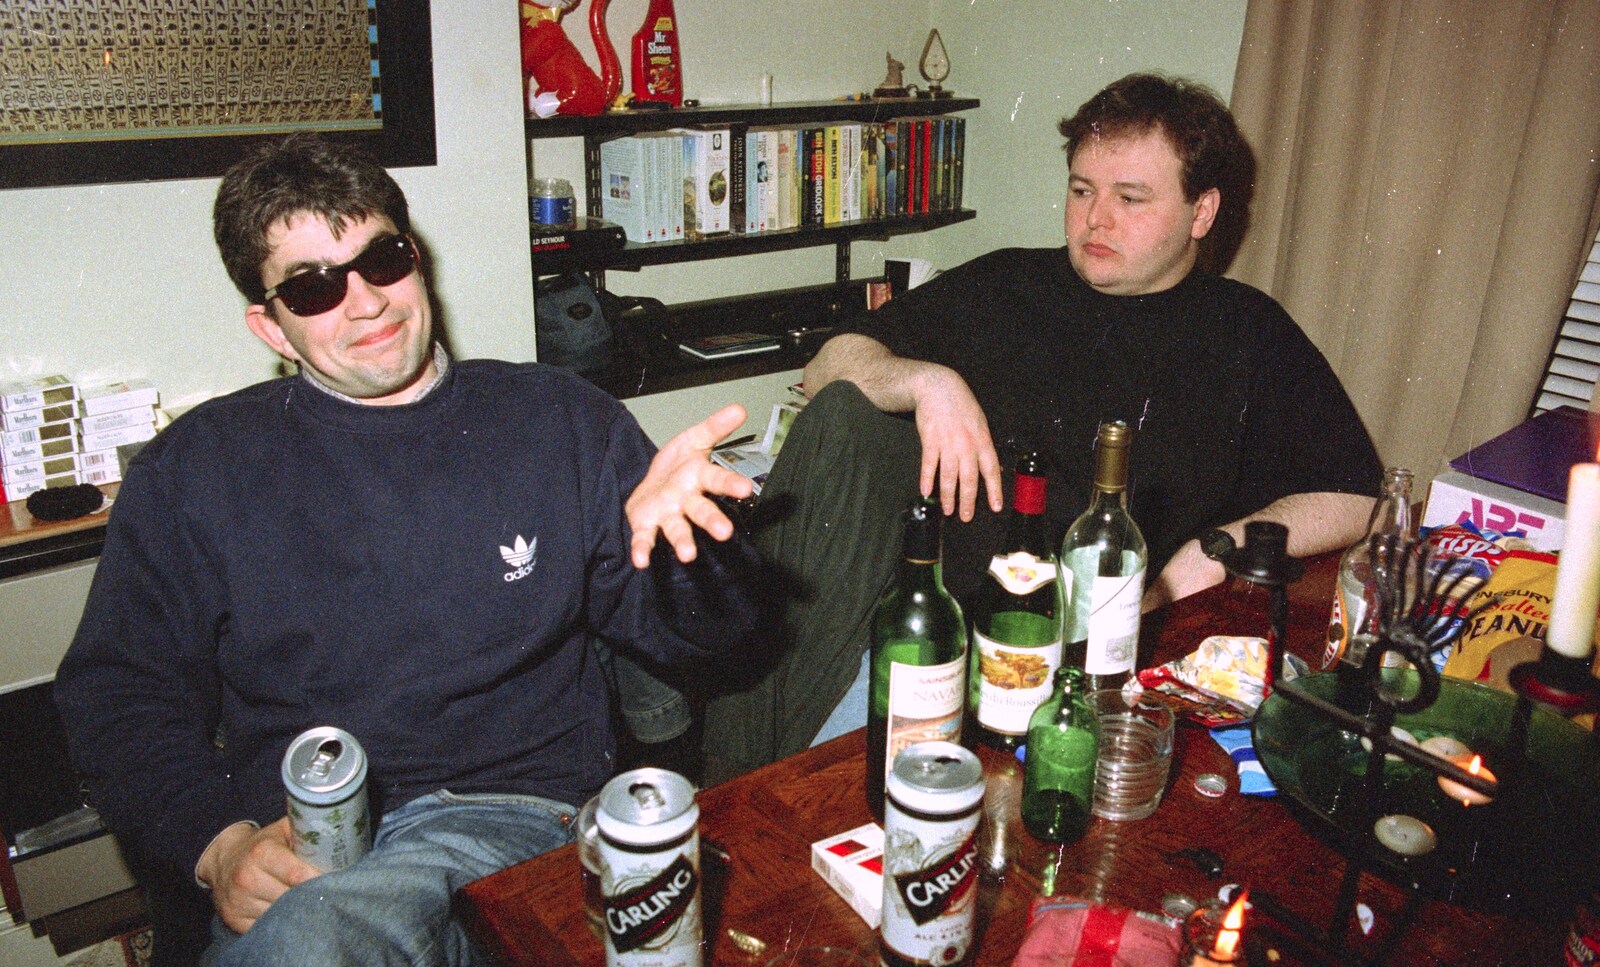 A CISU Party Round Trev's House, Cavendish Street, Ipswich - 17th May 1997: Neil and Sean